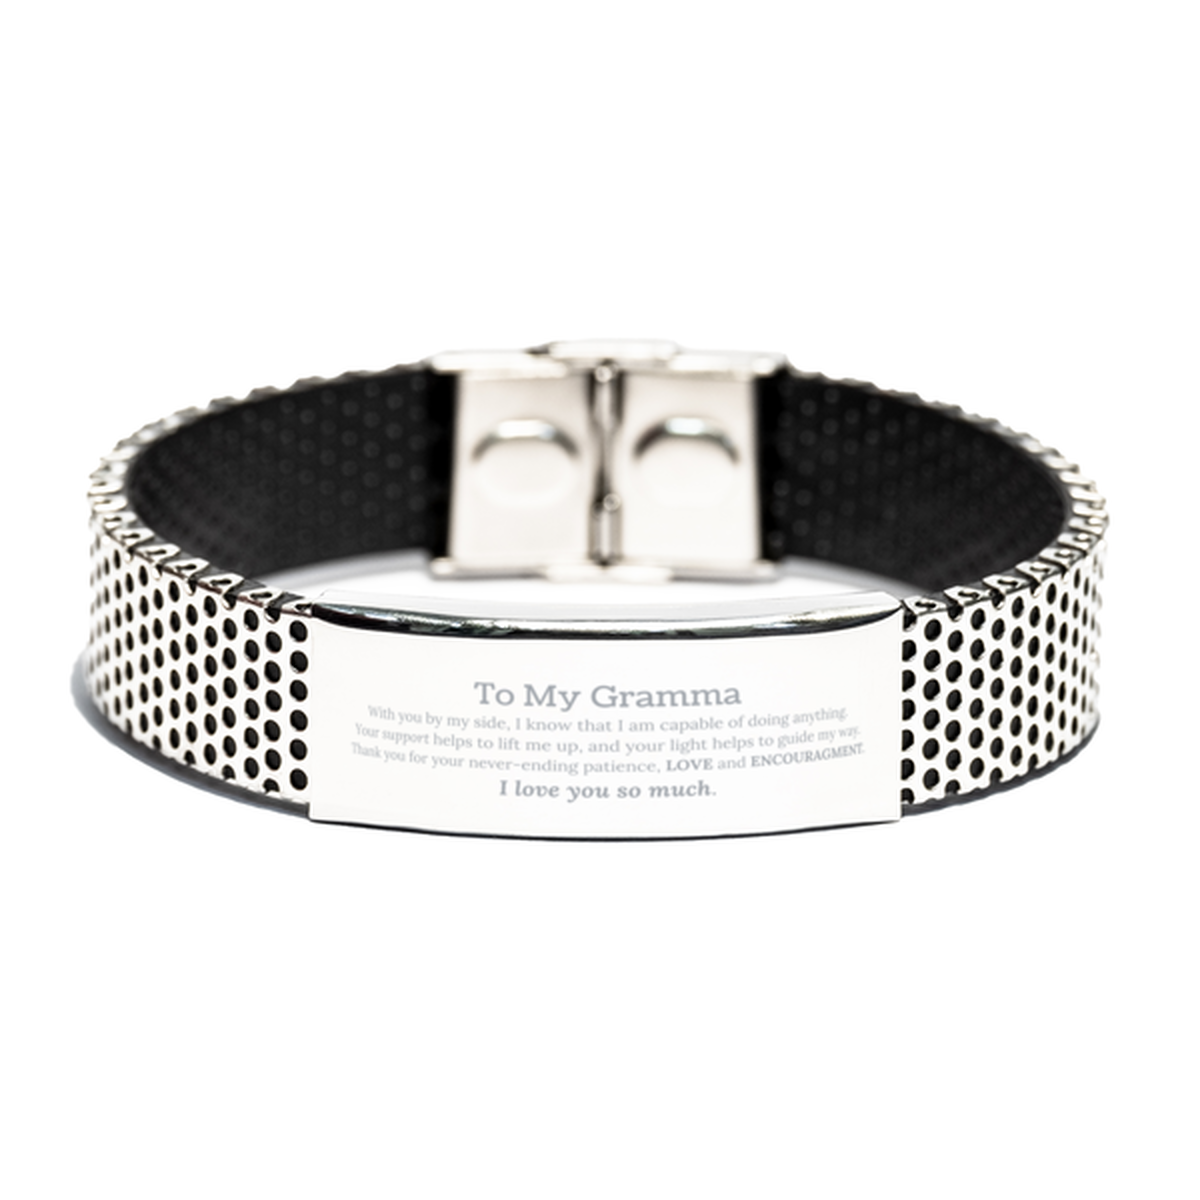 Appreciation Gramma Stainless Steel Bracelet Gifts, To My Gramma Birthday Christmas Wedding Keepsake Gifts for Gramma With you by my side, I know that I am capable of doing anything. I love you so much